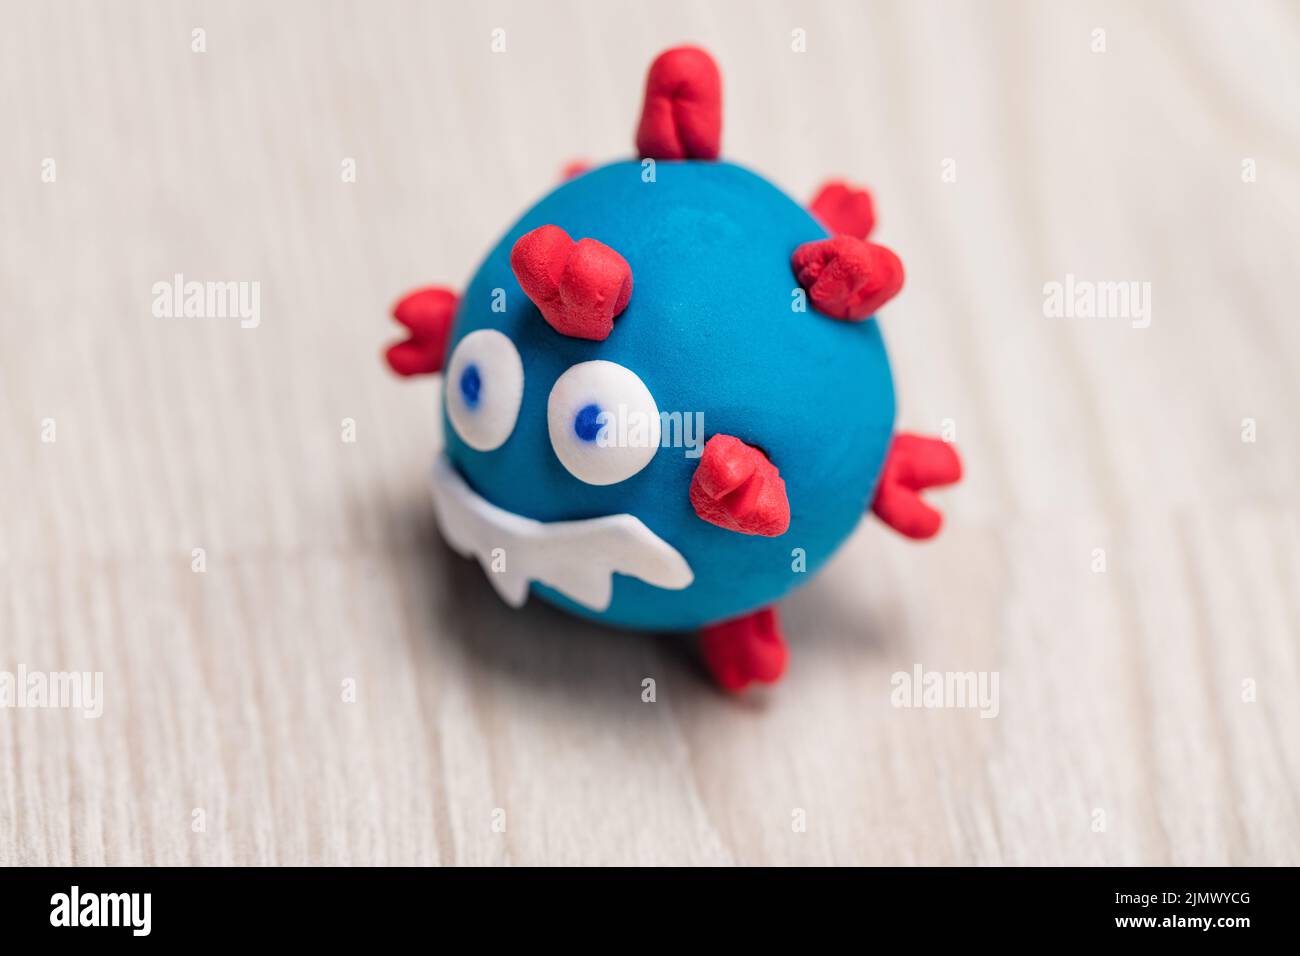 puppet depicting a small COVID-19 virus monster, smiling evilly and ready to strike... until its total defeat. Stock Photo